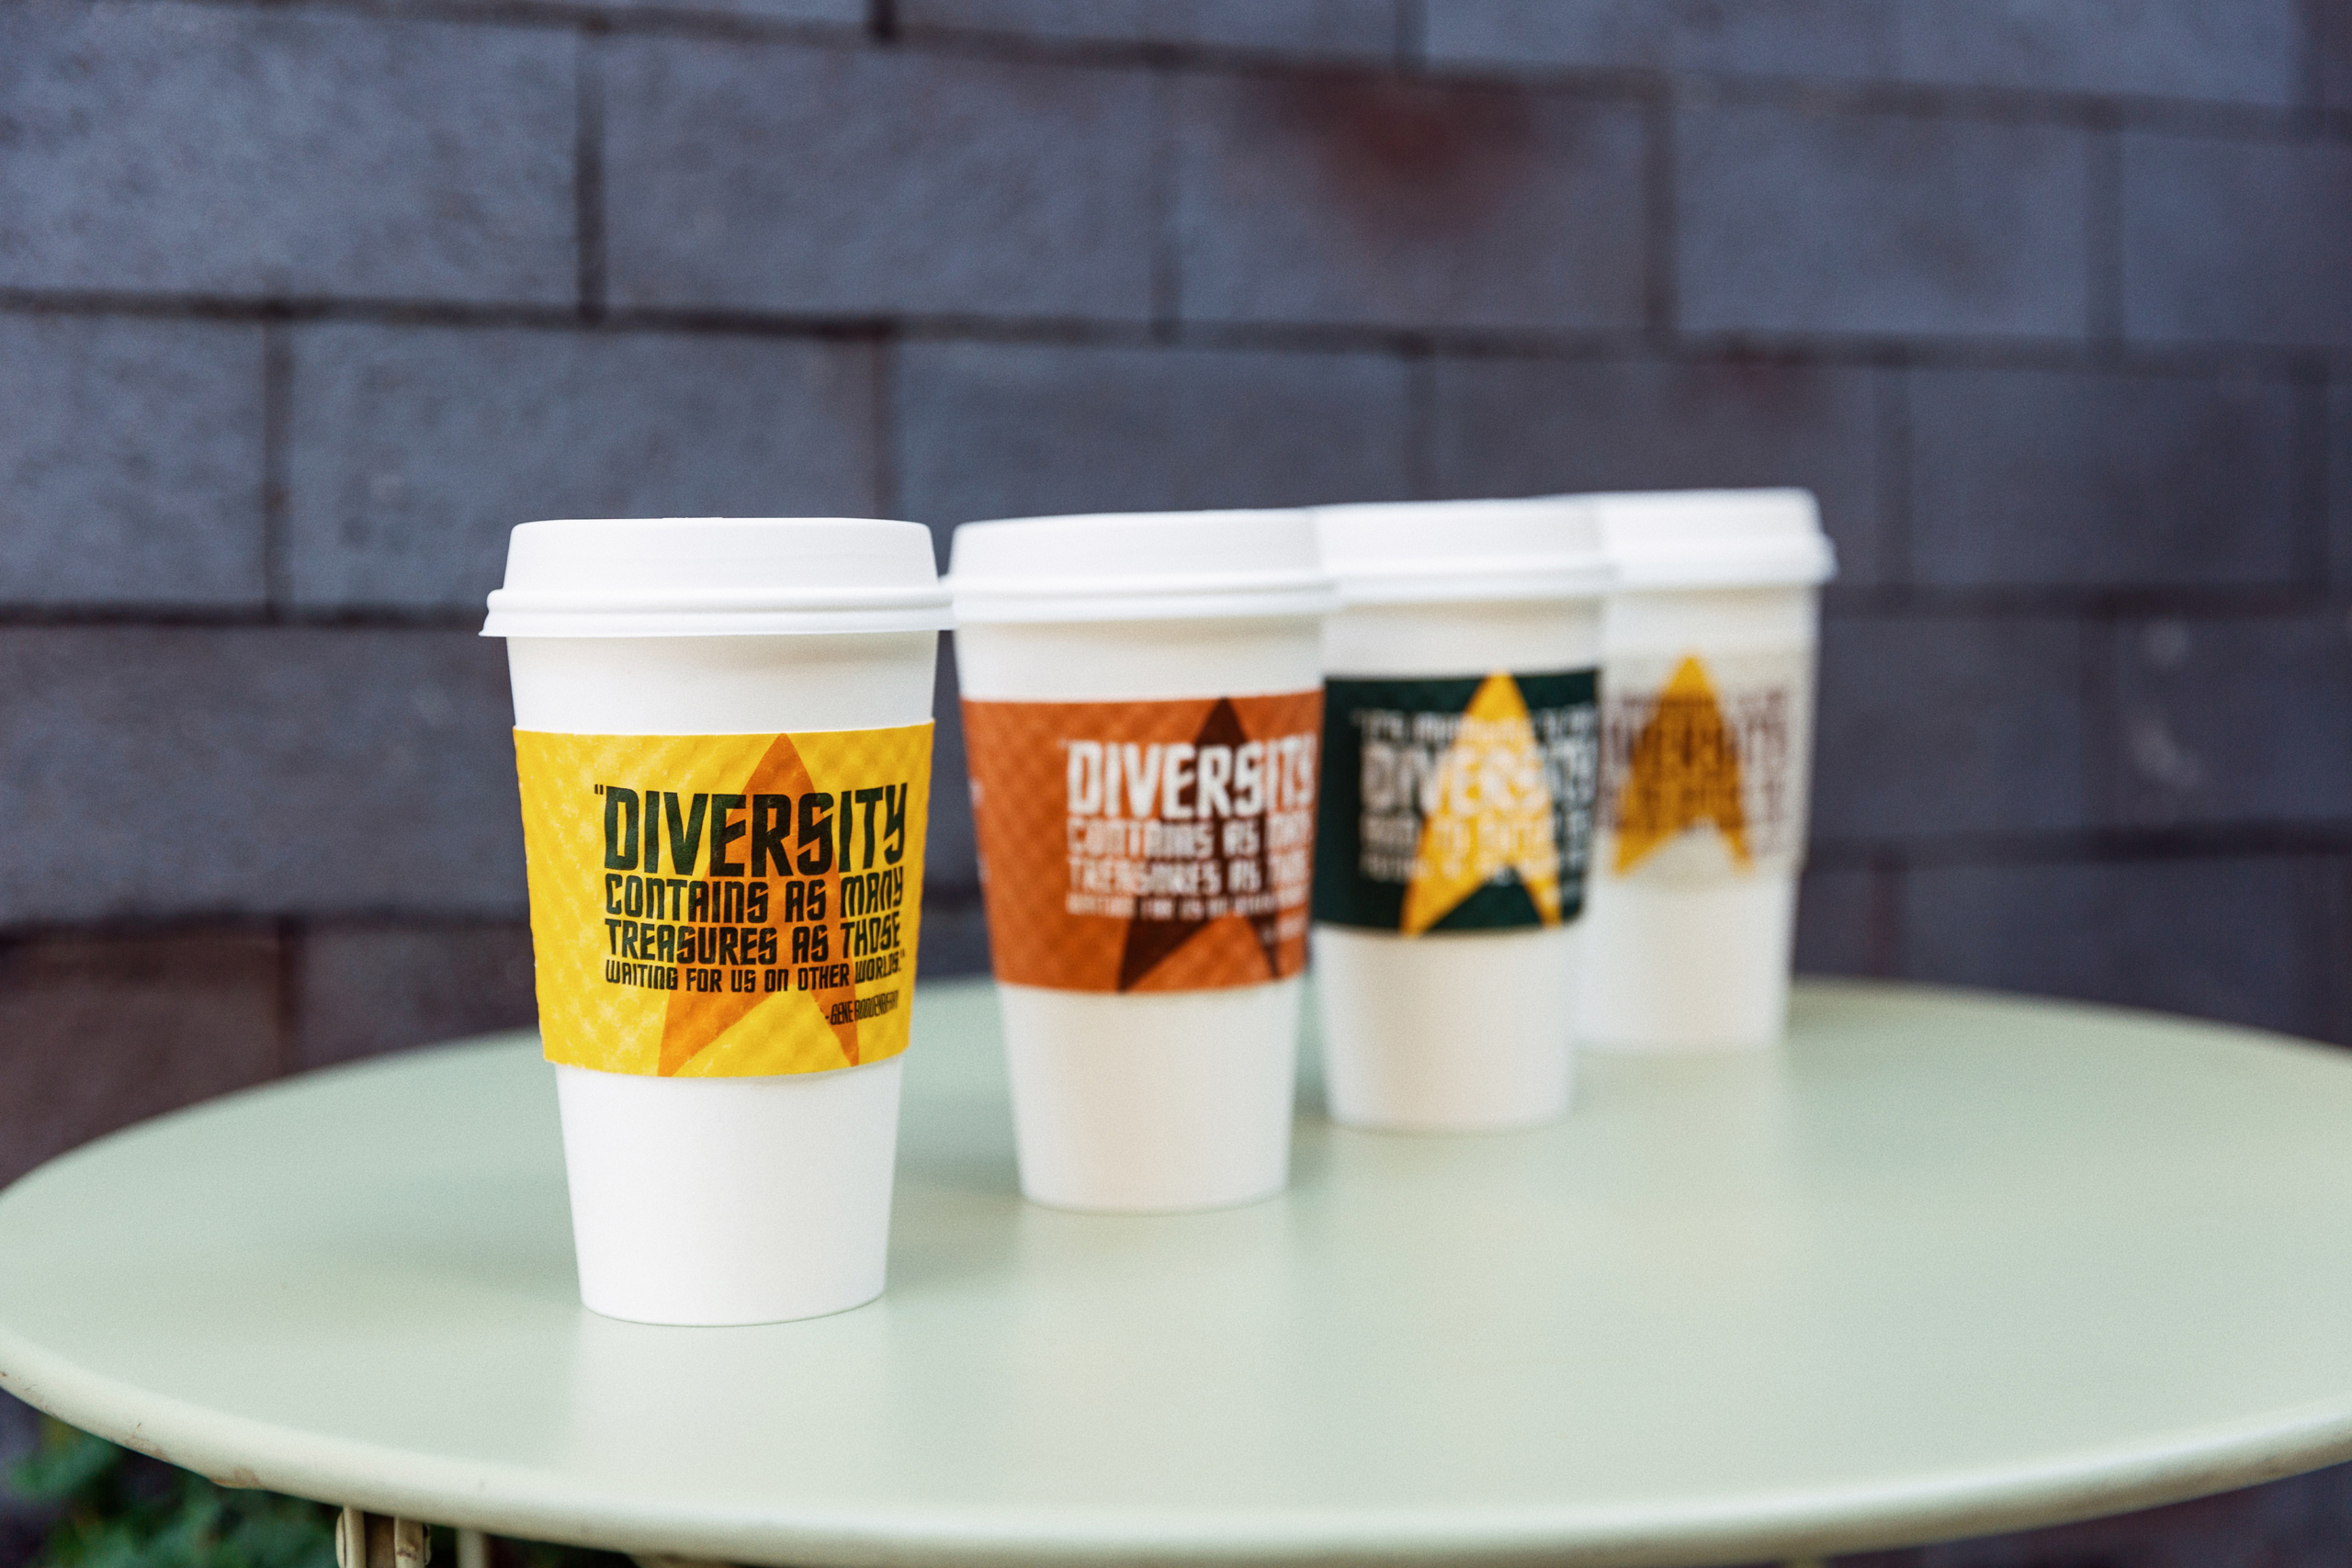 Four coffee cups with Star Trek-themed sleeves sit in a row on a cafe table against a grey brick wall.